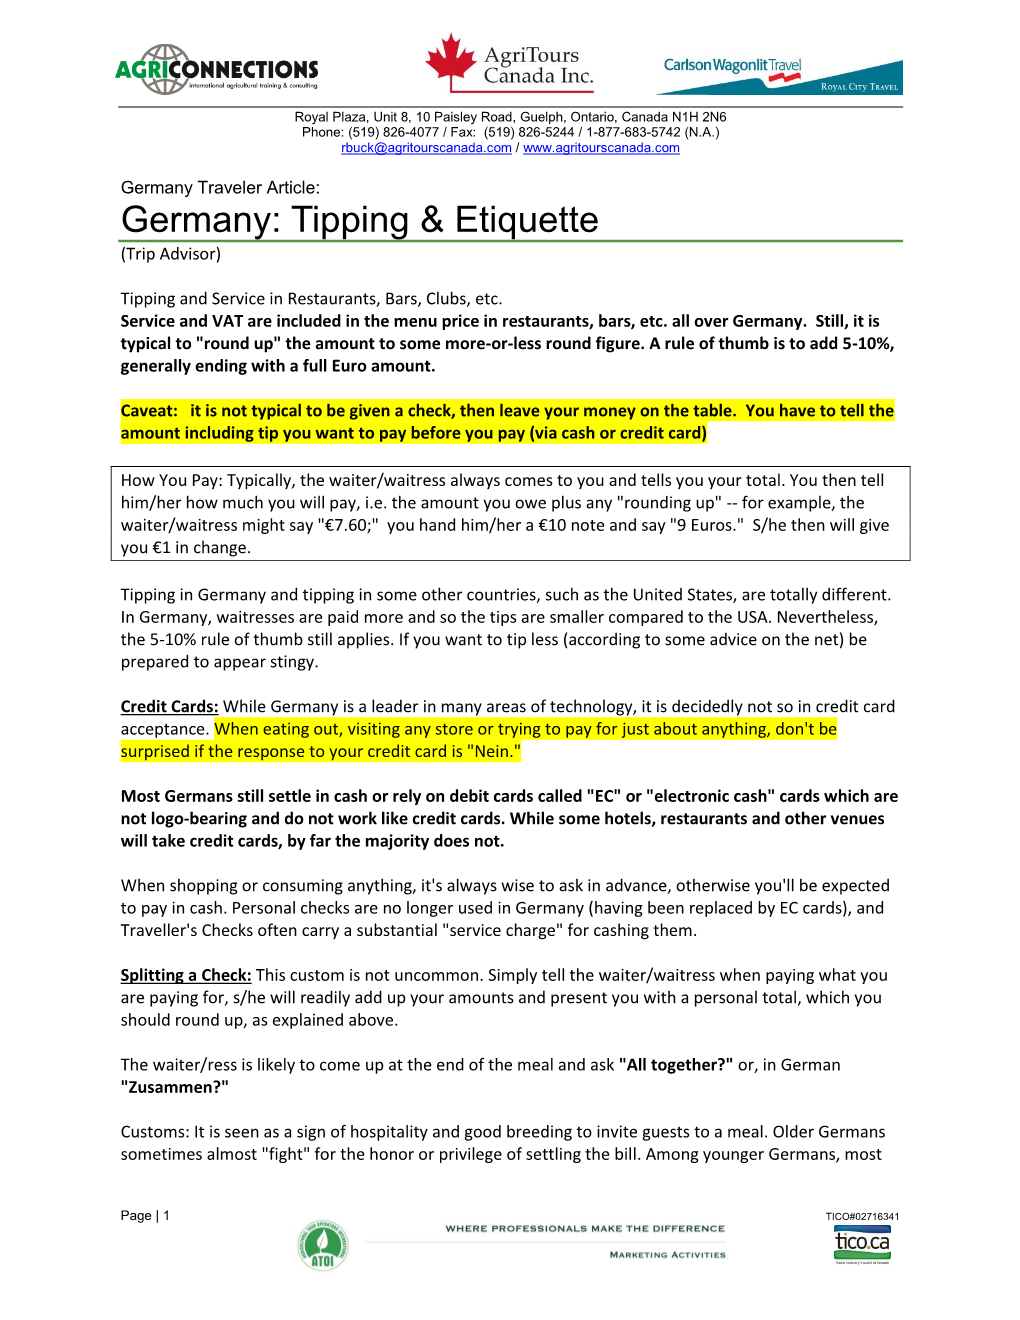 Germany: Tipping & Etiquette